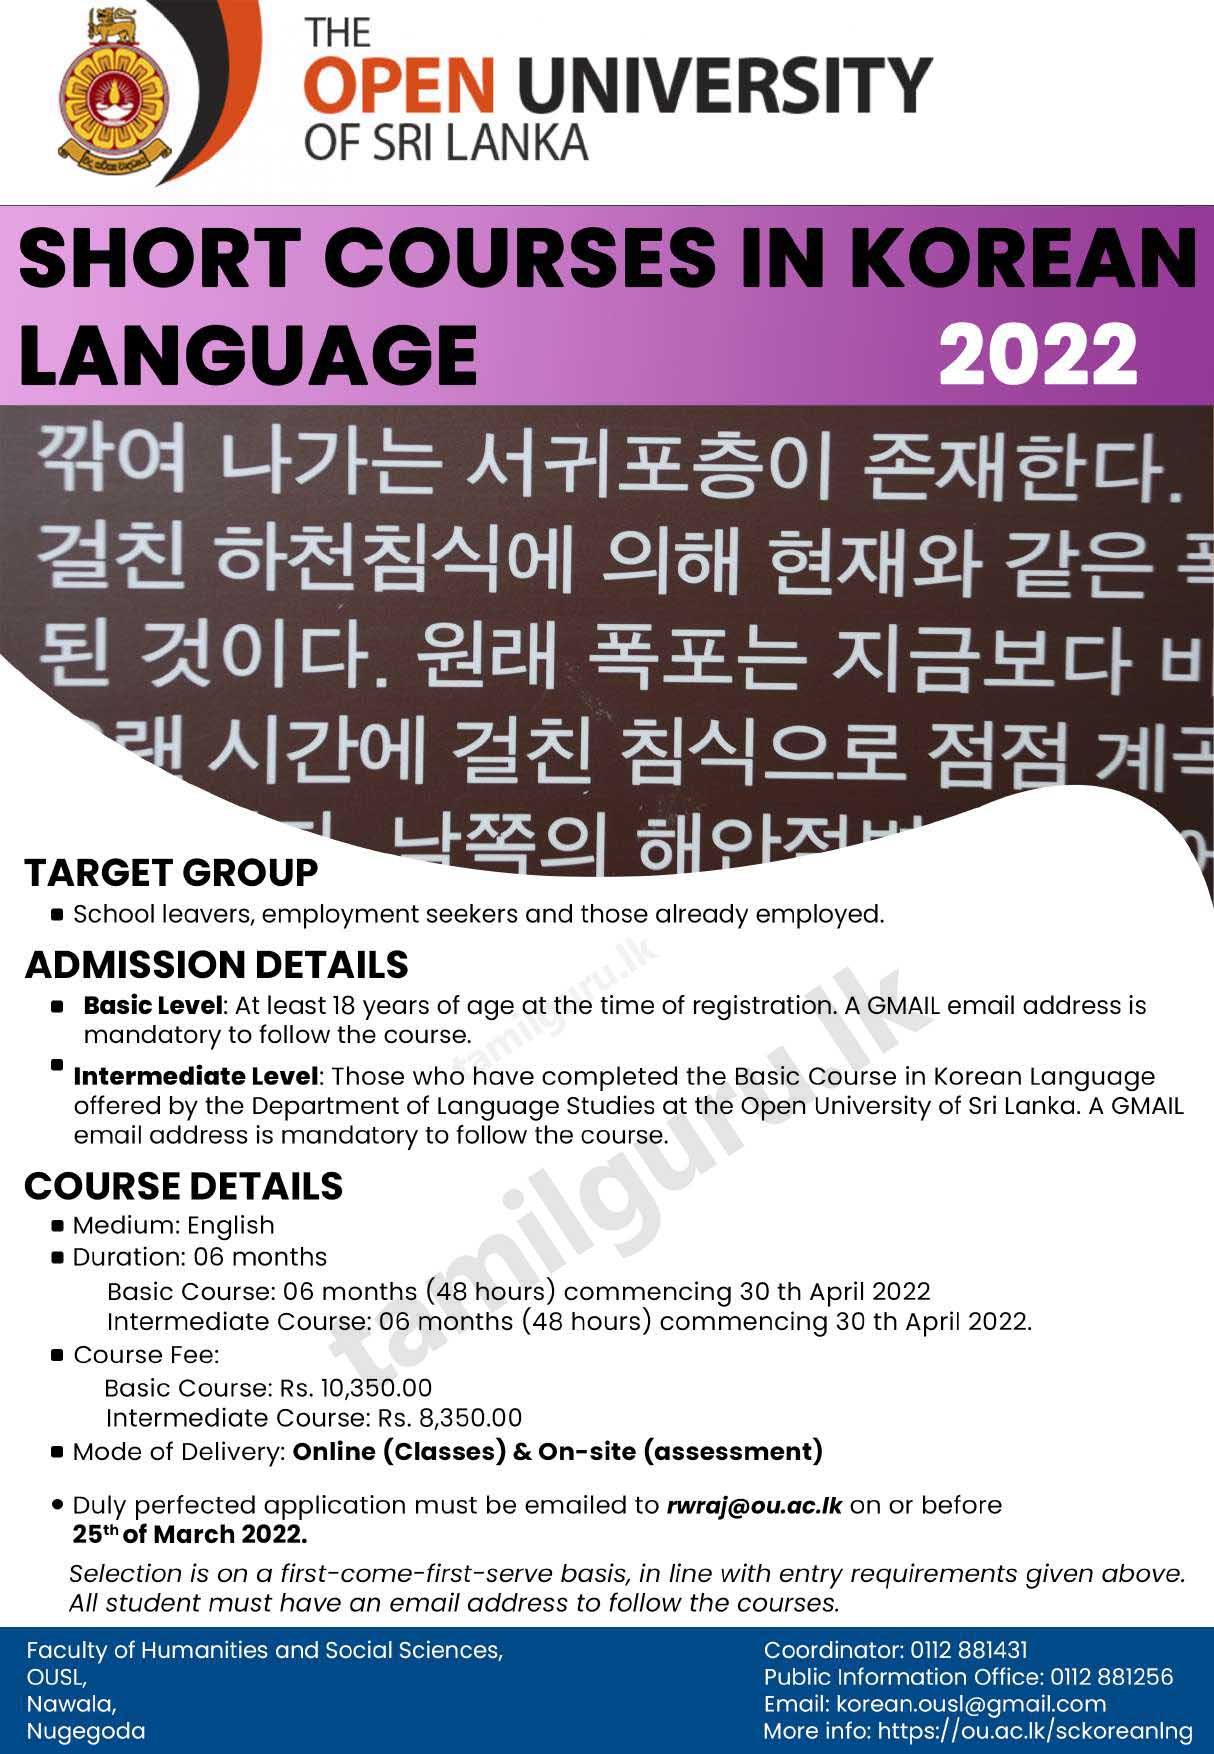 Calling Applications for Short Course in Korean Language (2022) Conducted by The Open University of Sri Lanka (OUSL)